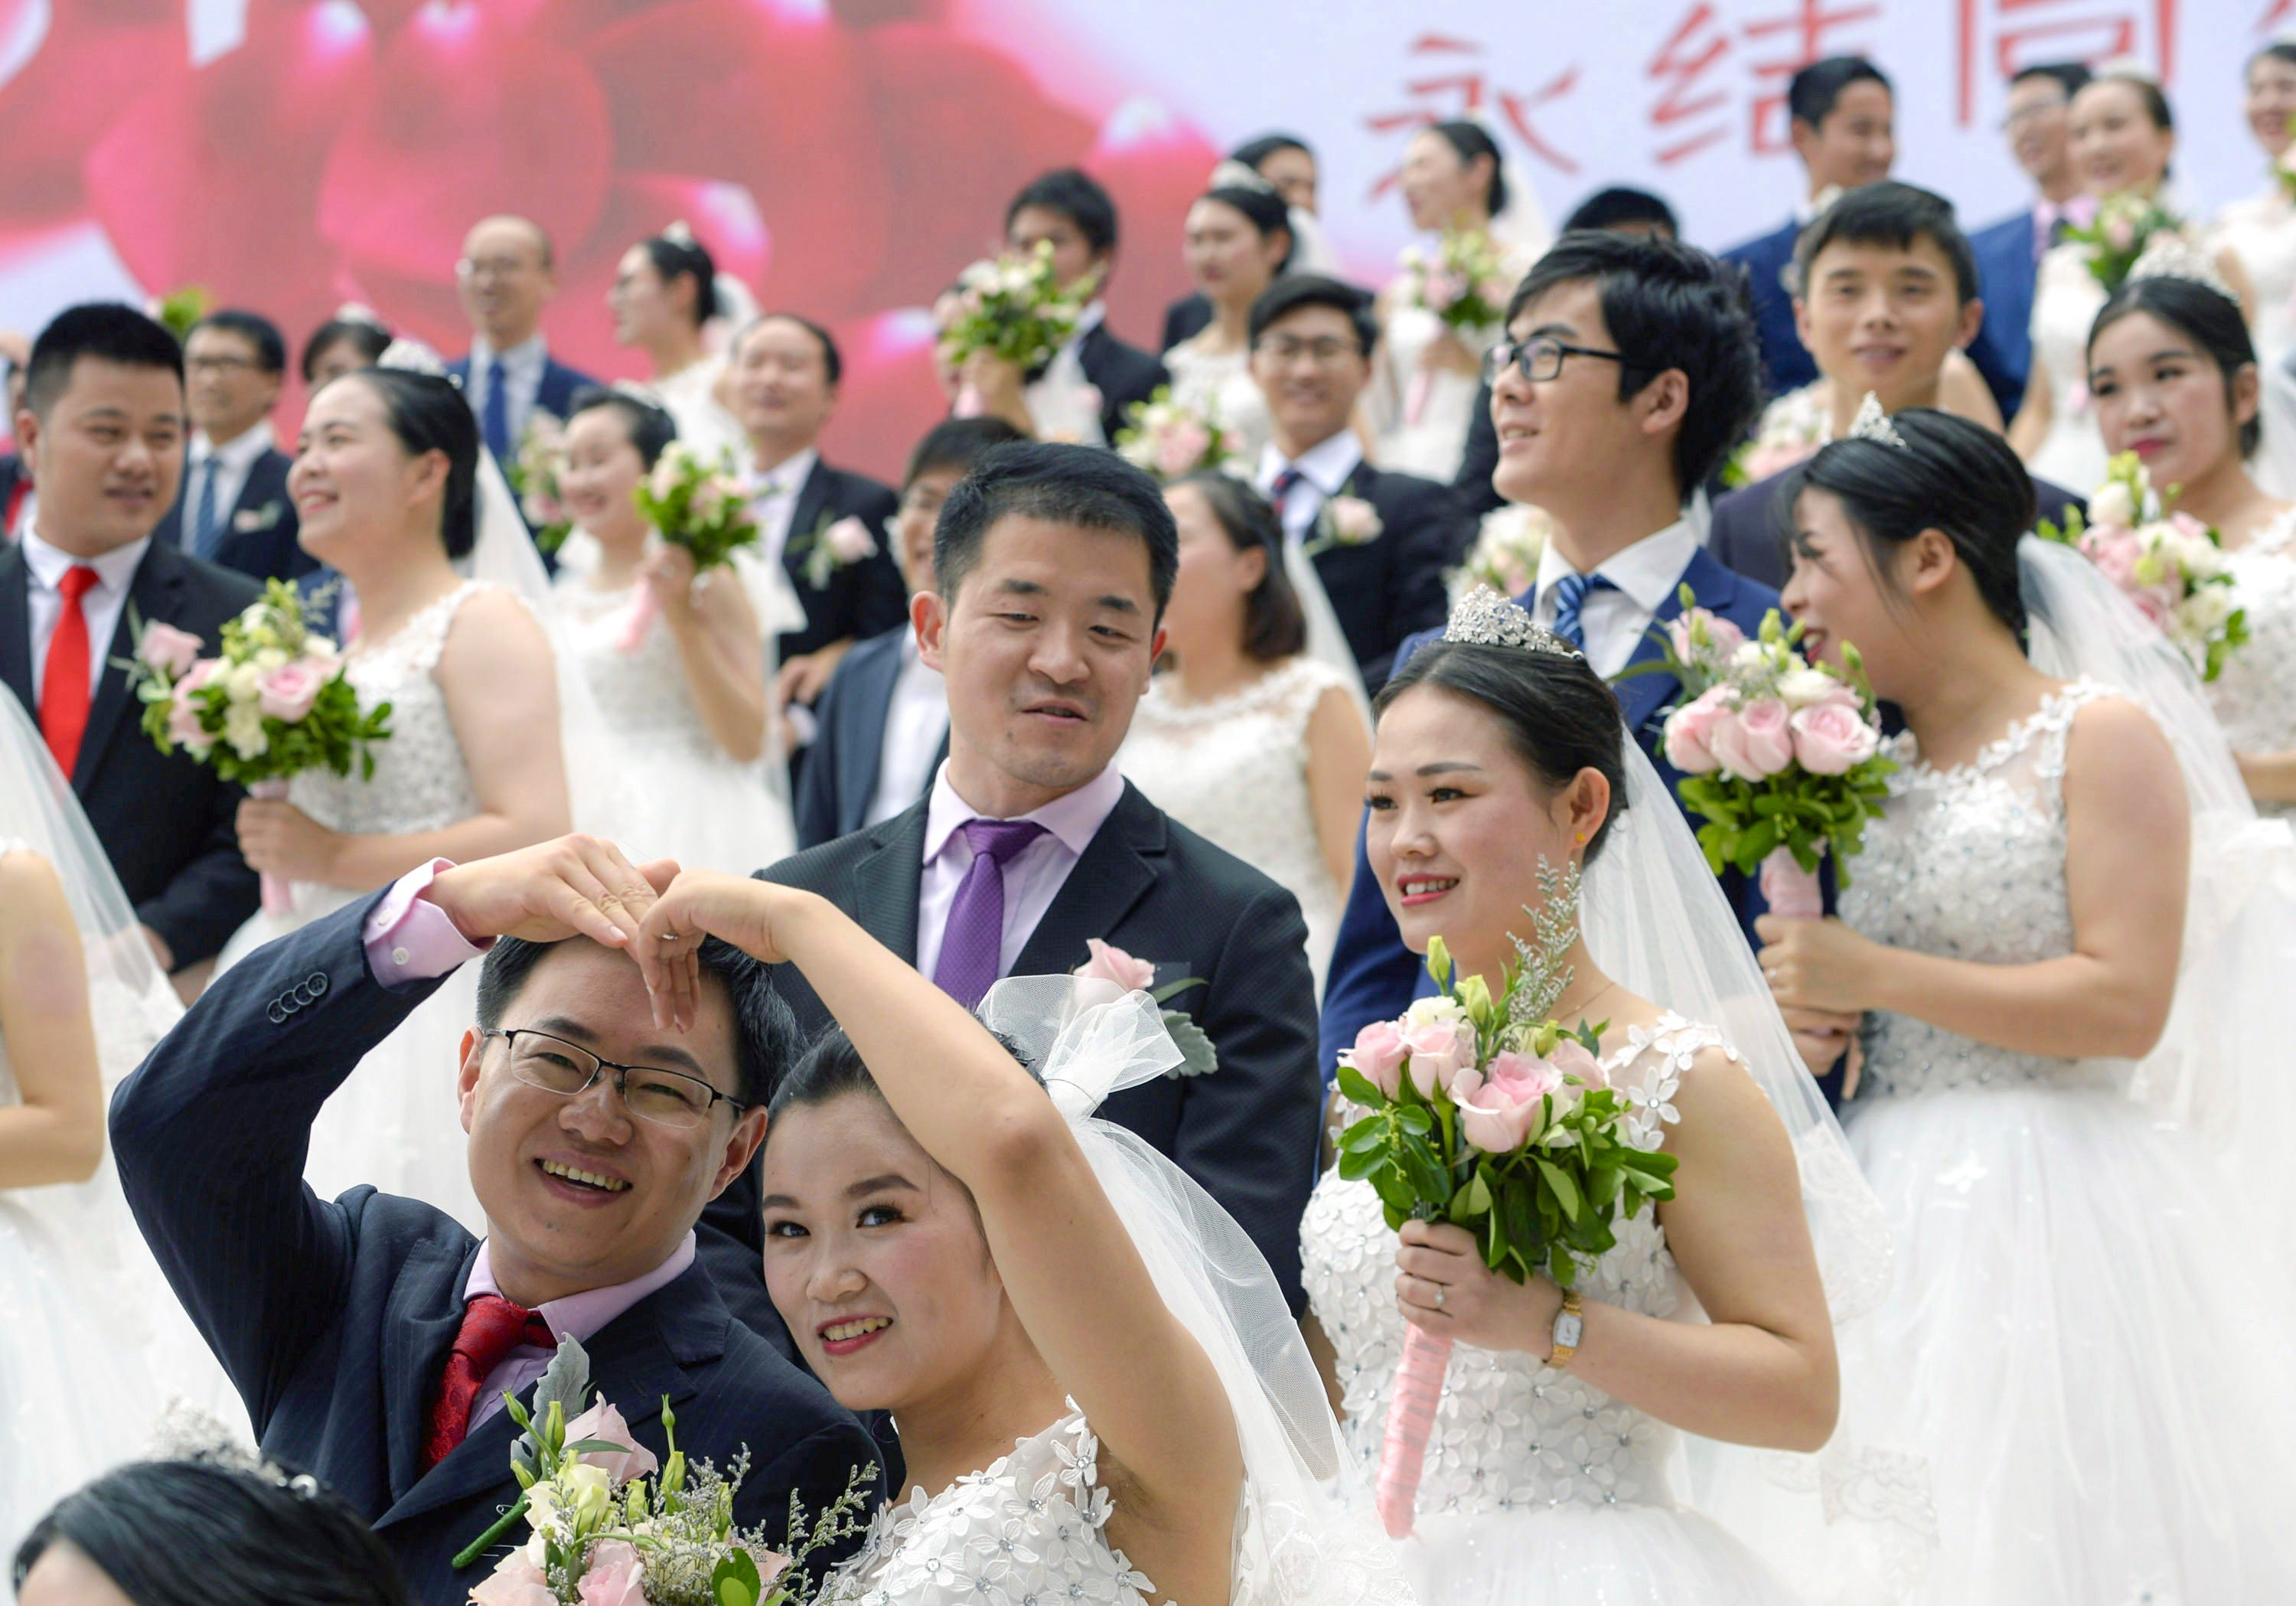 Couples in many parts of the country will no longer have to return to place of their hukou to register their marriage. Photo: Visual China Group